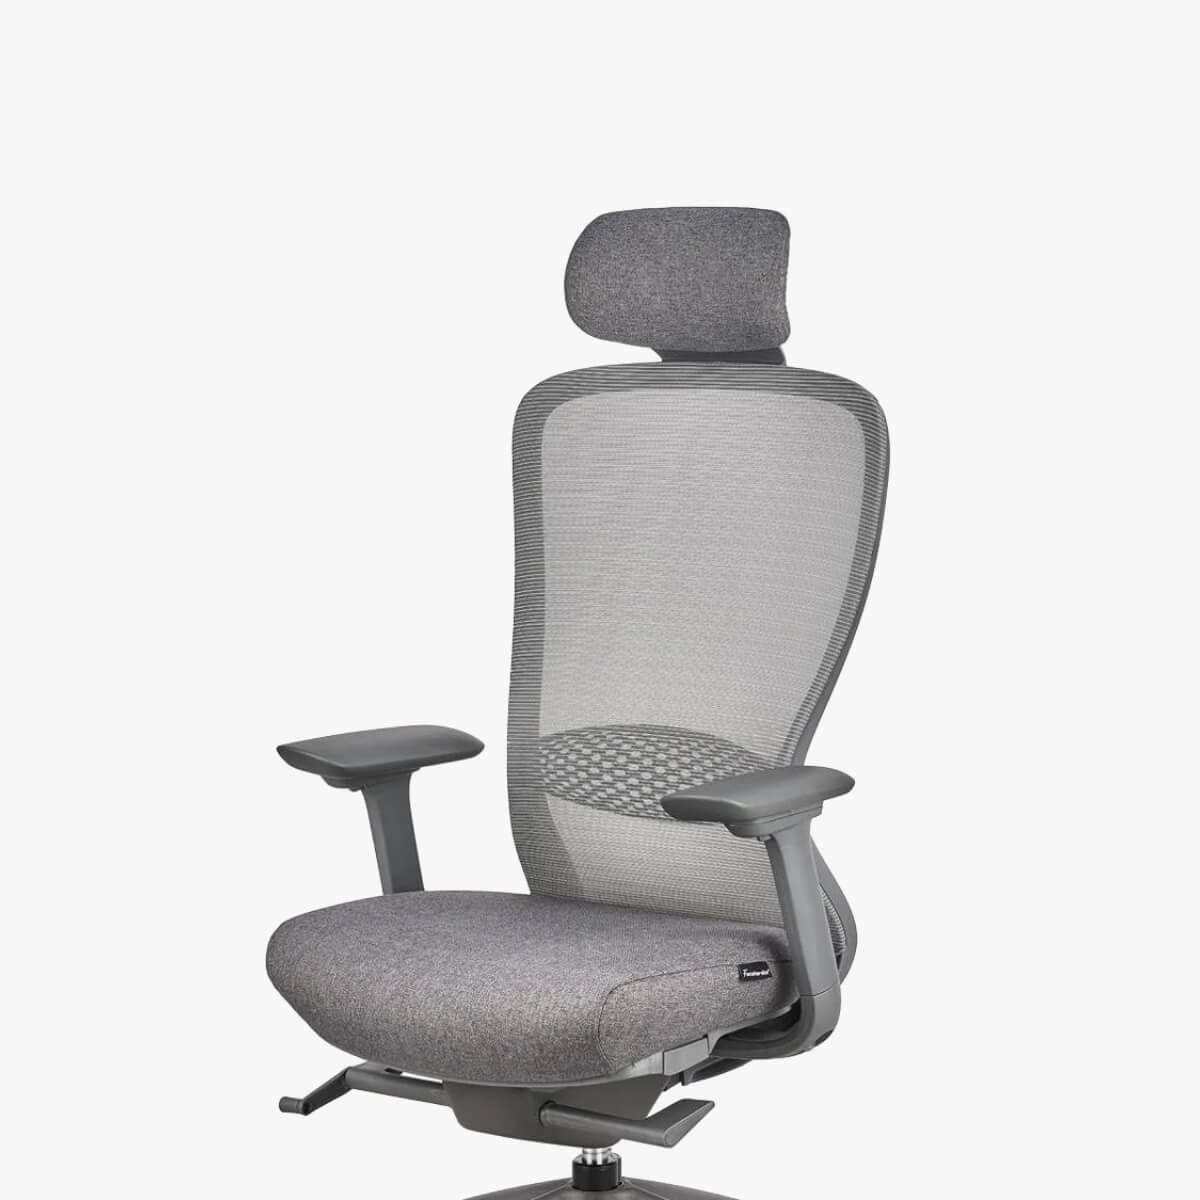 Featherlite Helix High Back Chair